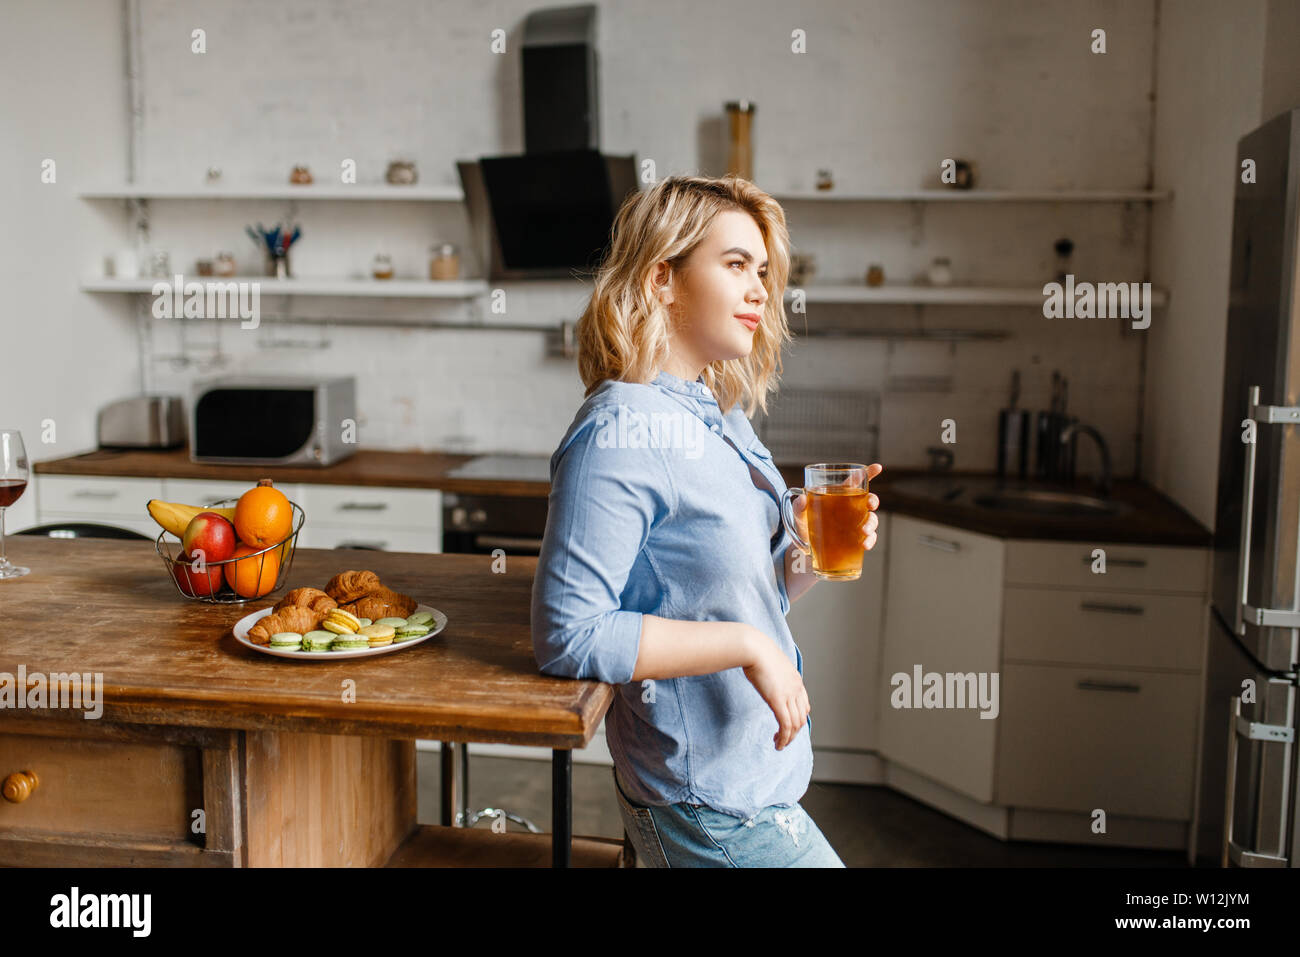 Woman having breakfast with croissants and cookies Stock Photo